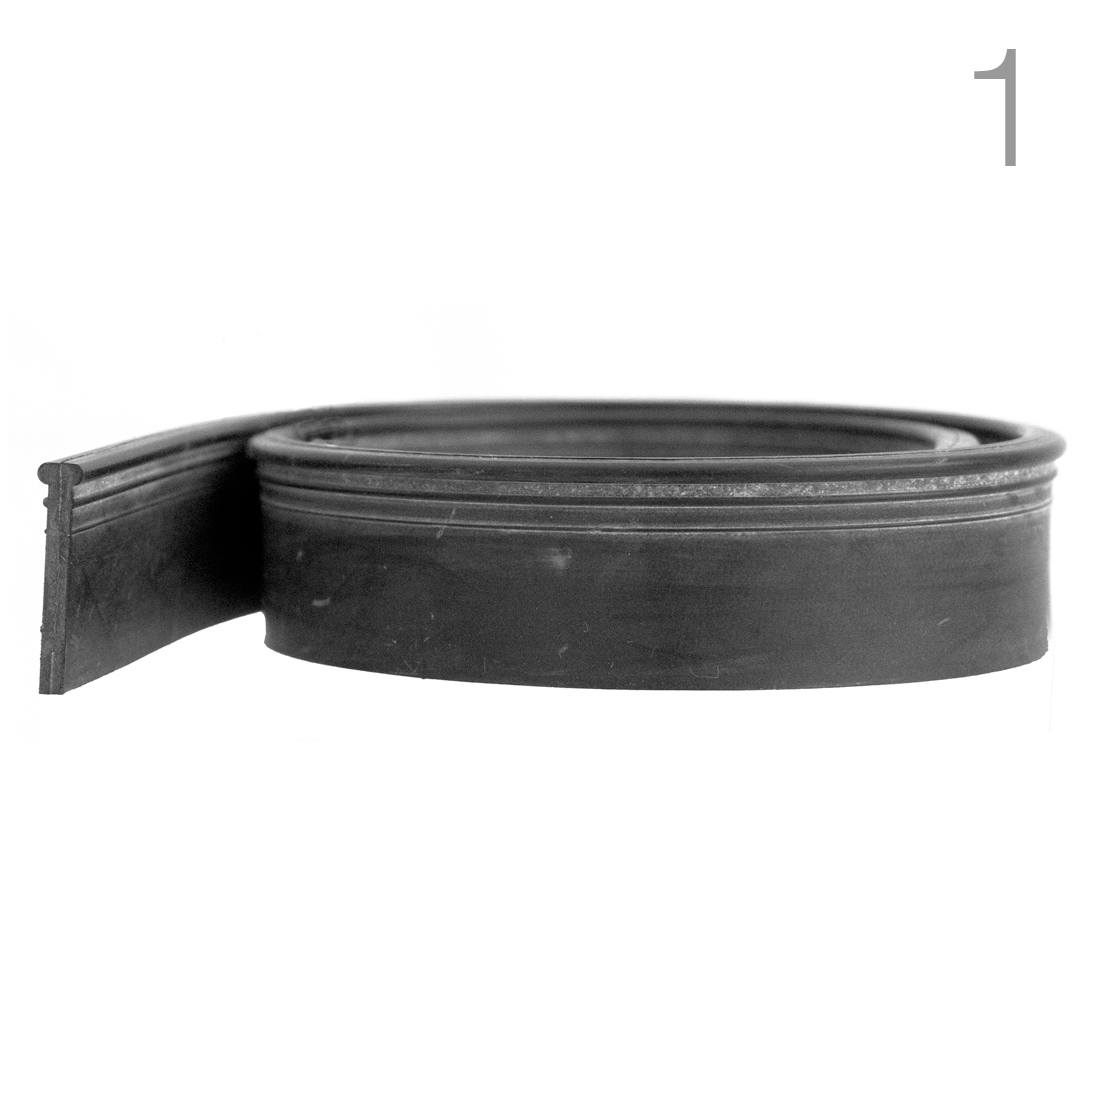 BlackDiamond Flat Top Squeegee Rubber - 12 Pack - Single Rubber - Number 1 - Rolled-up View